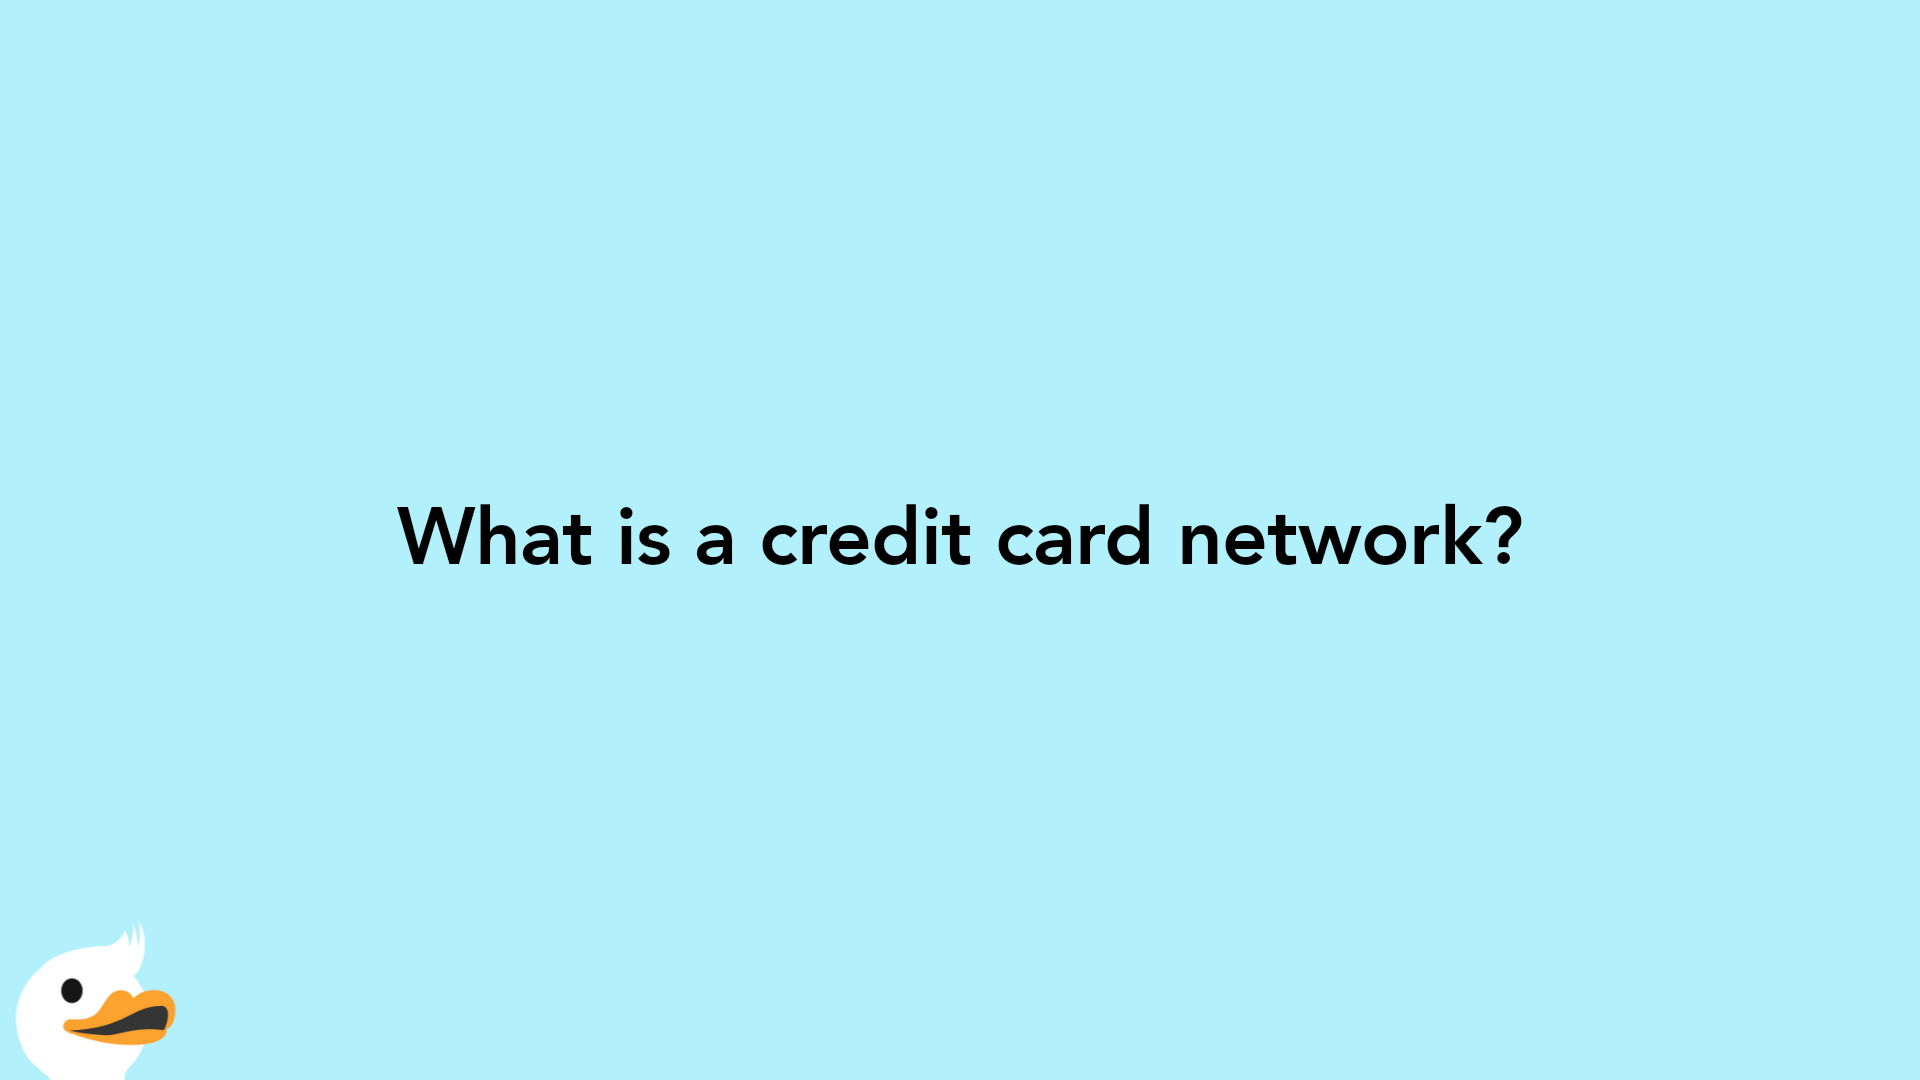 What is a credit card network?